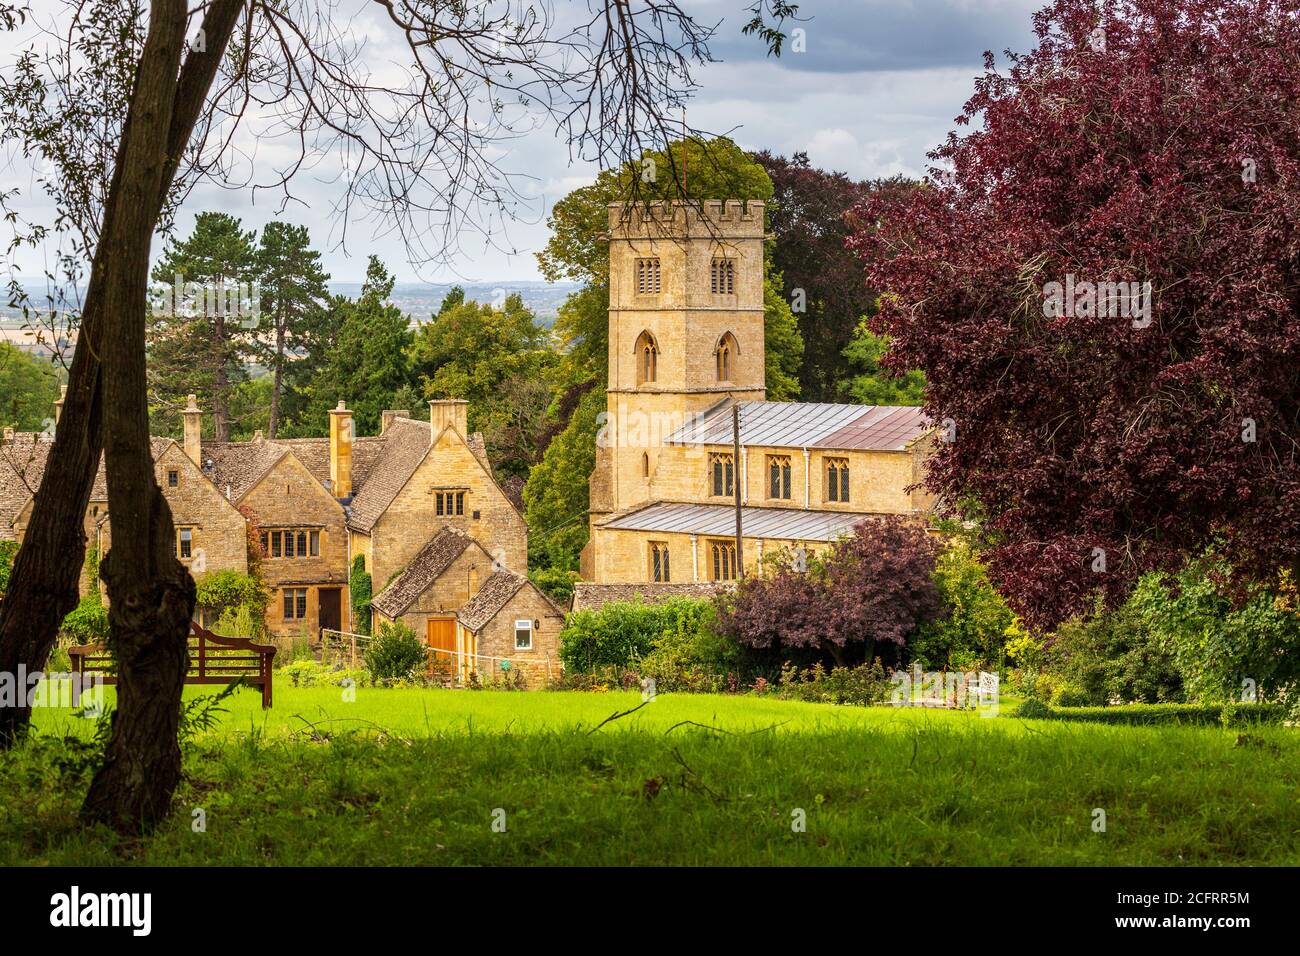 The church of St Michael in the Cotswold village of Buckland from the grounds of the Buckland Hotel, Gloucestershire, England Stock Photo